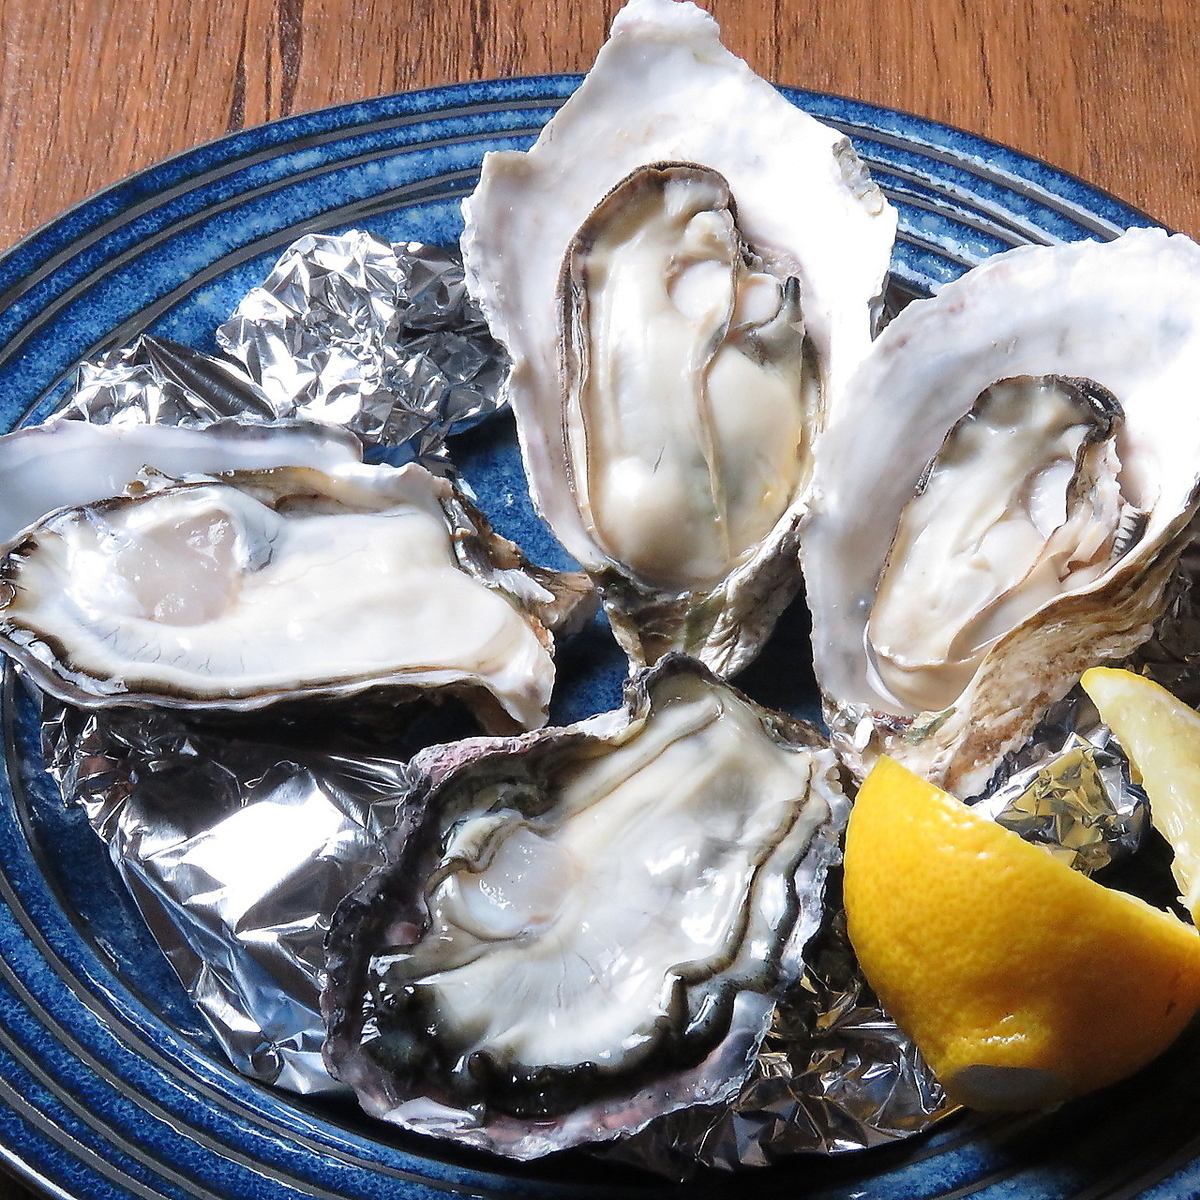 Oysters x Lemon ◆ Enjoy Hiroshima's specialties in luxury ◆ Open along the Kyobashi riverbed ♪ All-you-can-drink course is popular